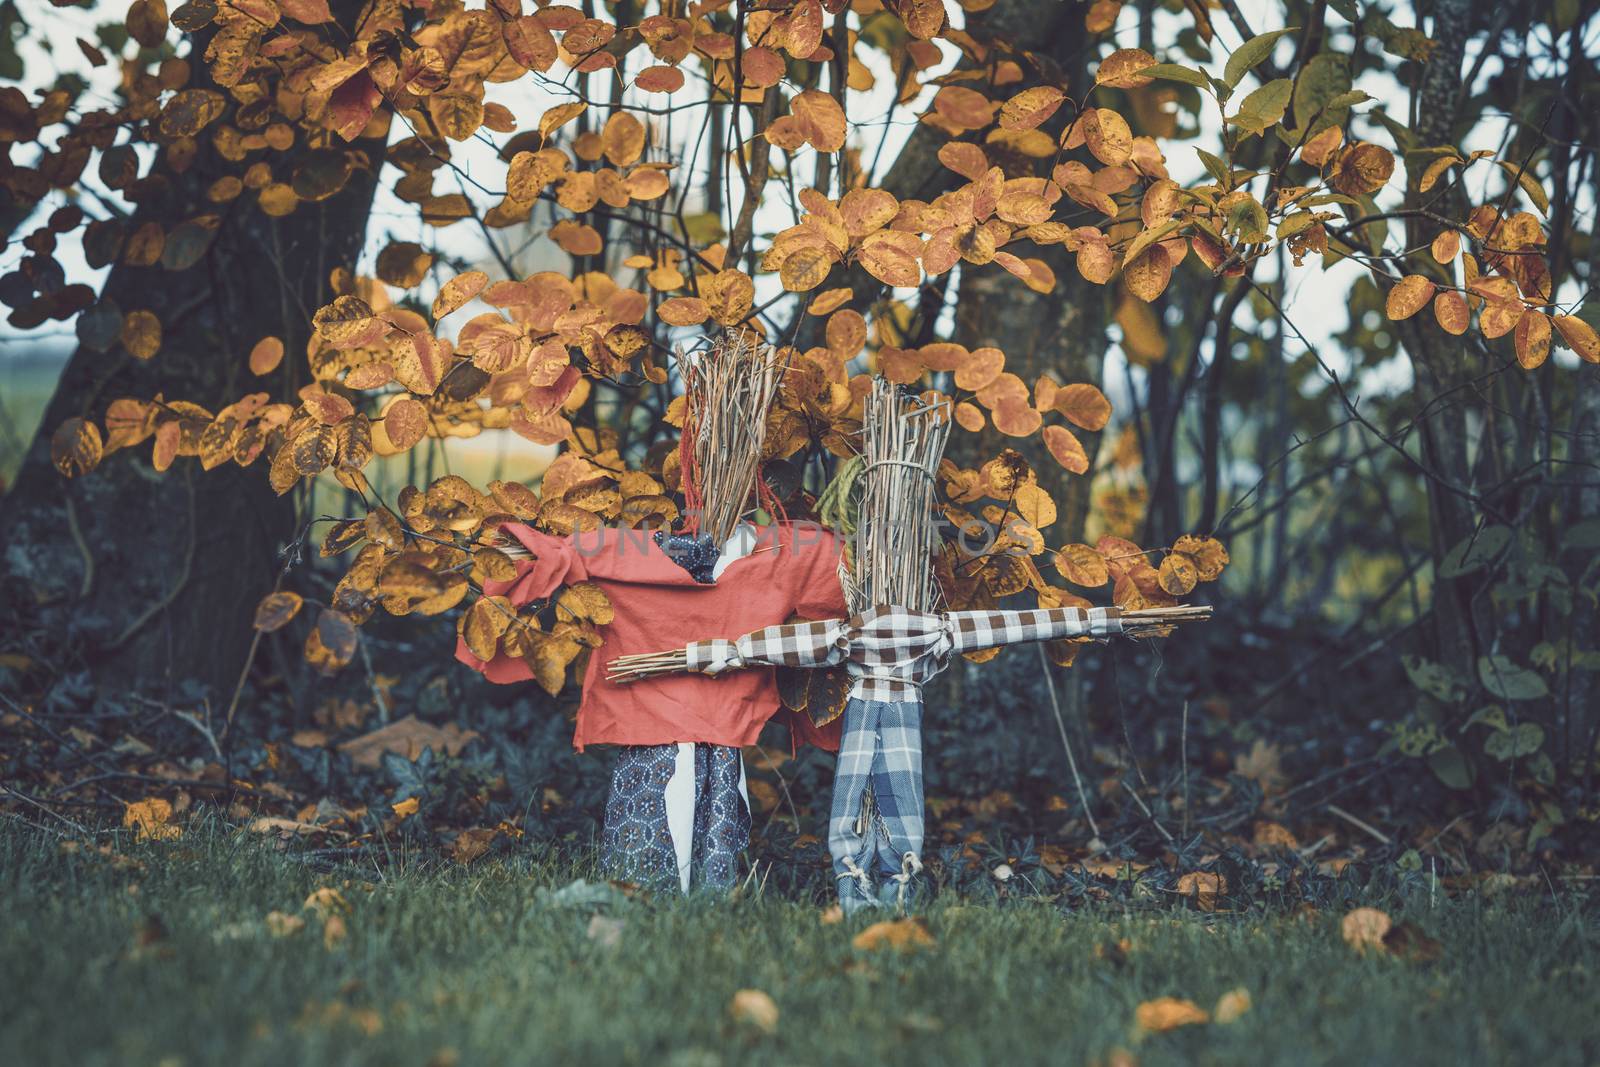 Scarecrows in a garden in the fall by Sportactive